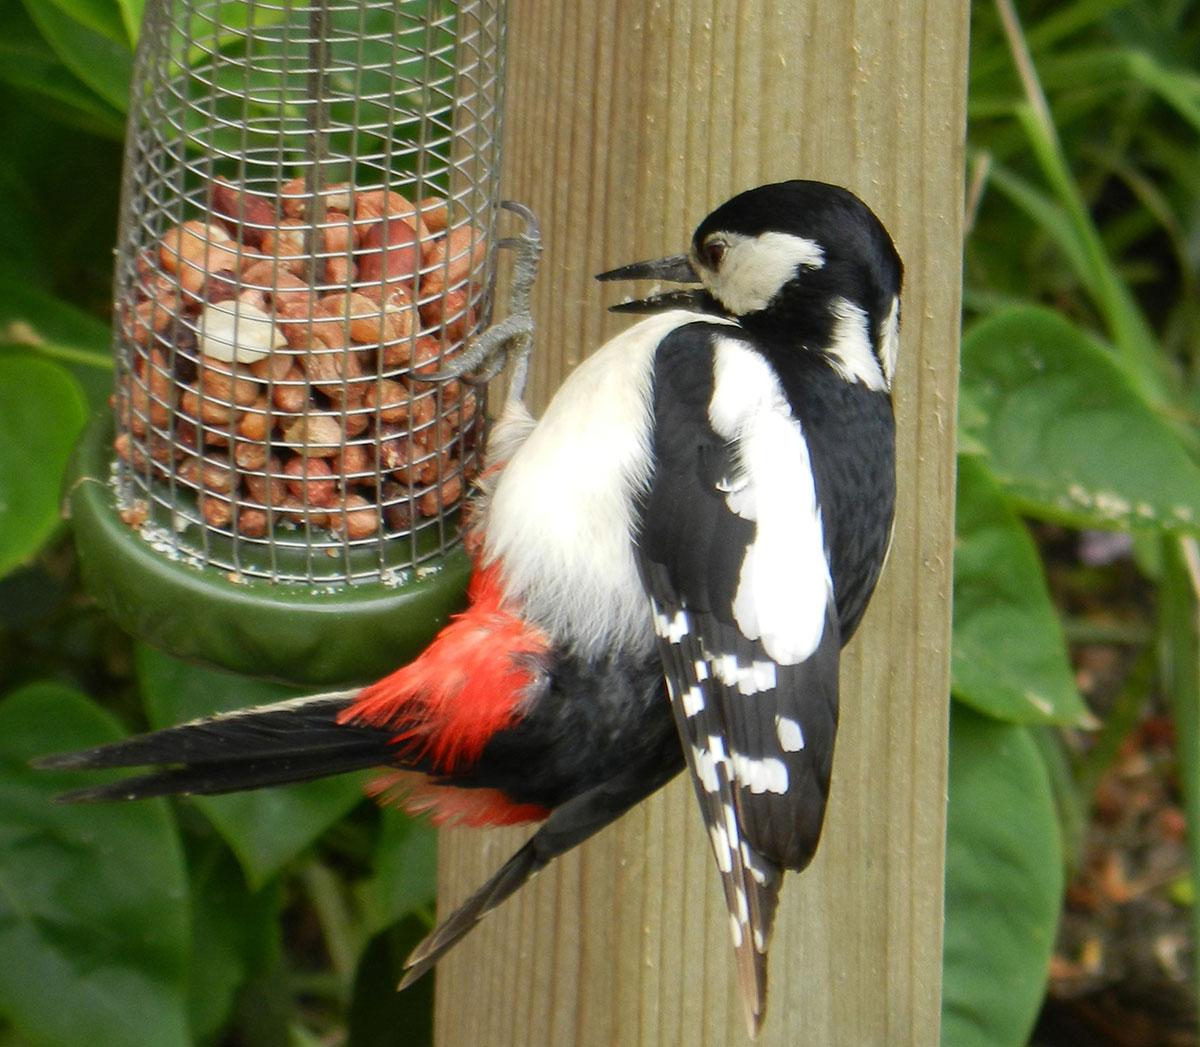 READER PIC: Jim James took this shot of a spotted woodpecker visited his garden for some food.